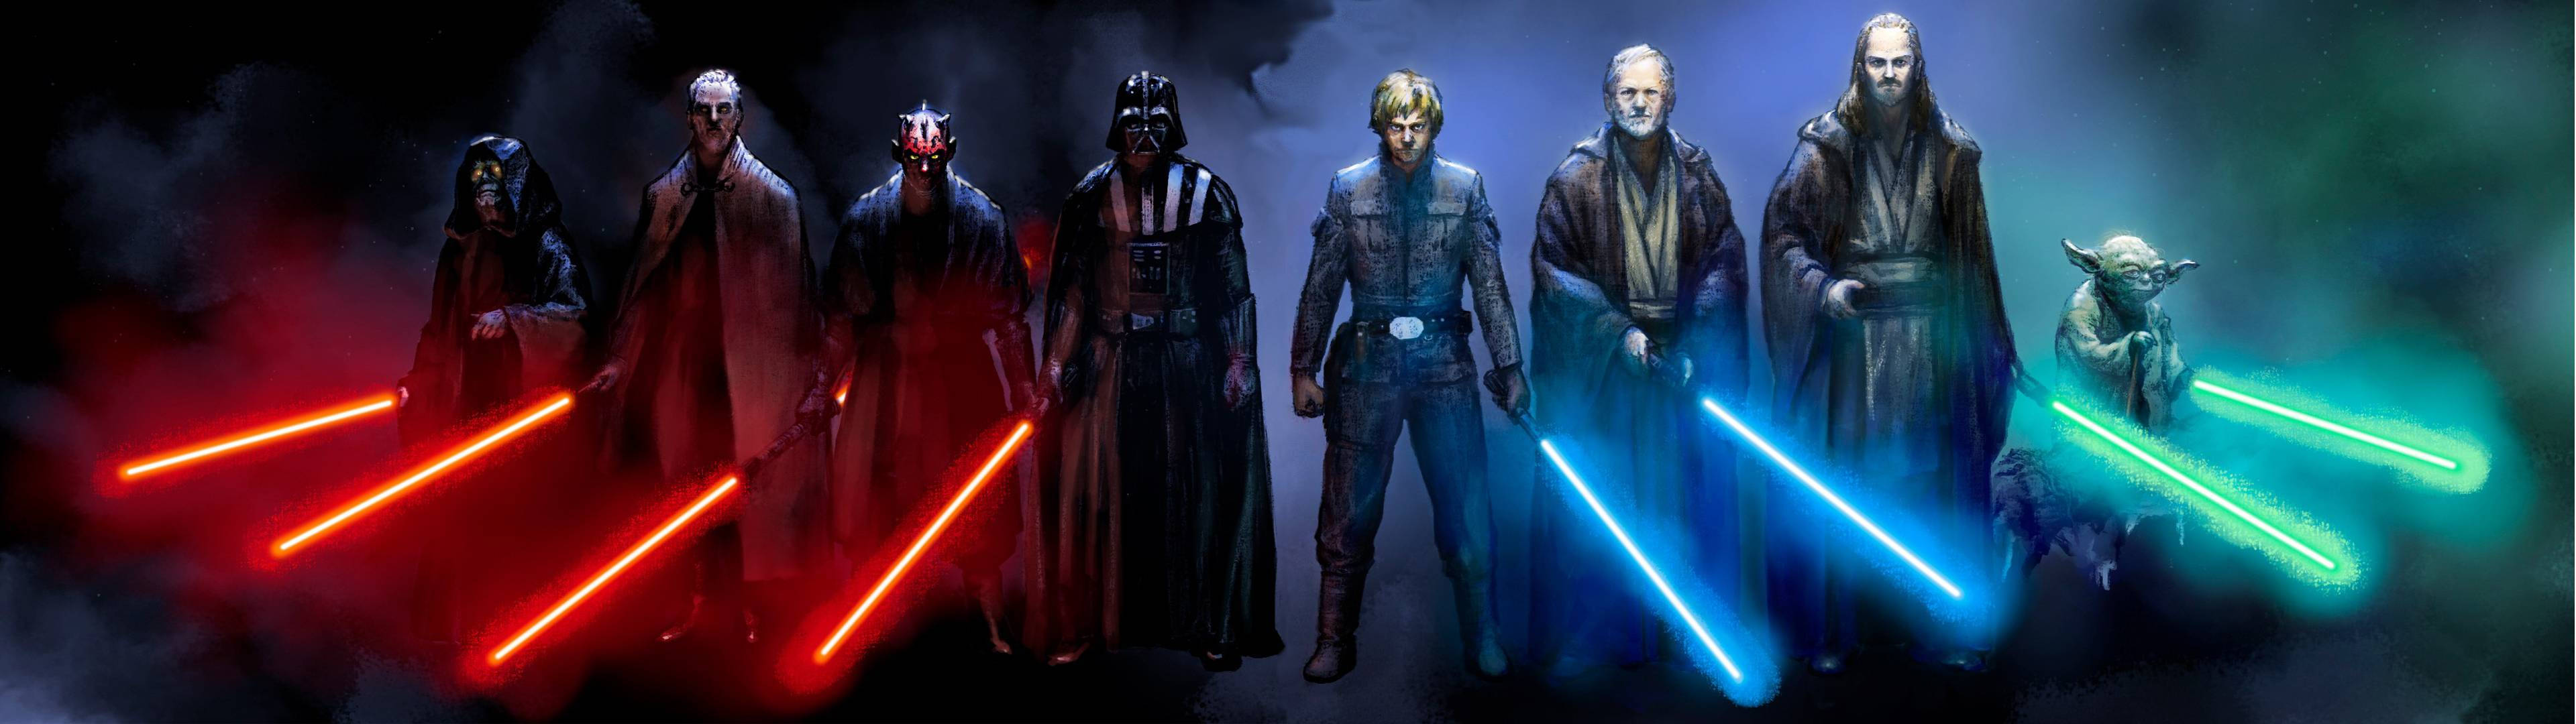 Star Wars Villains Dual Screen Cover Picture